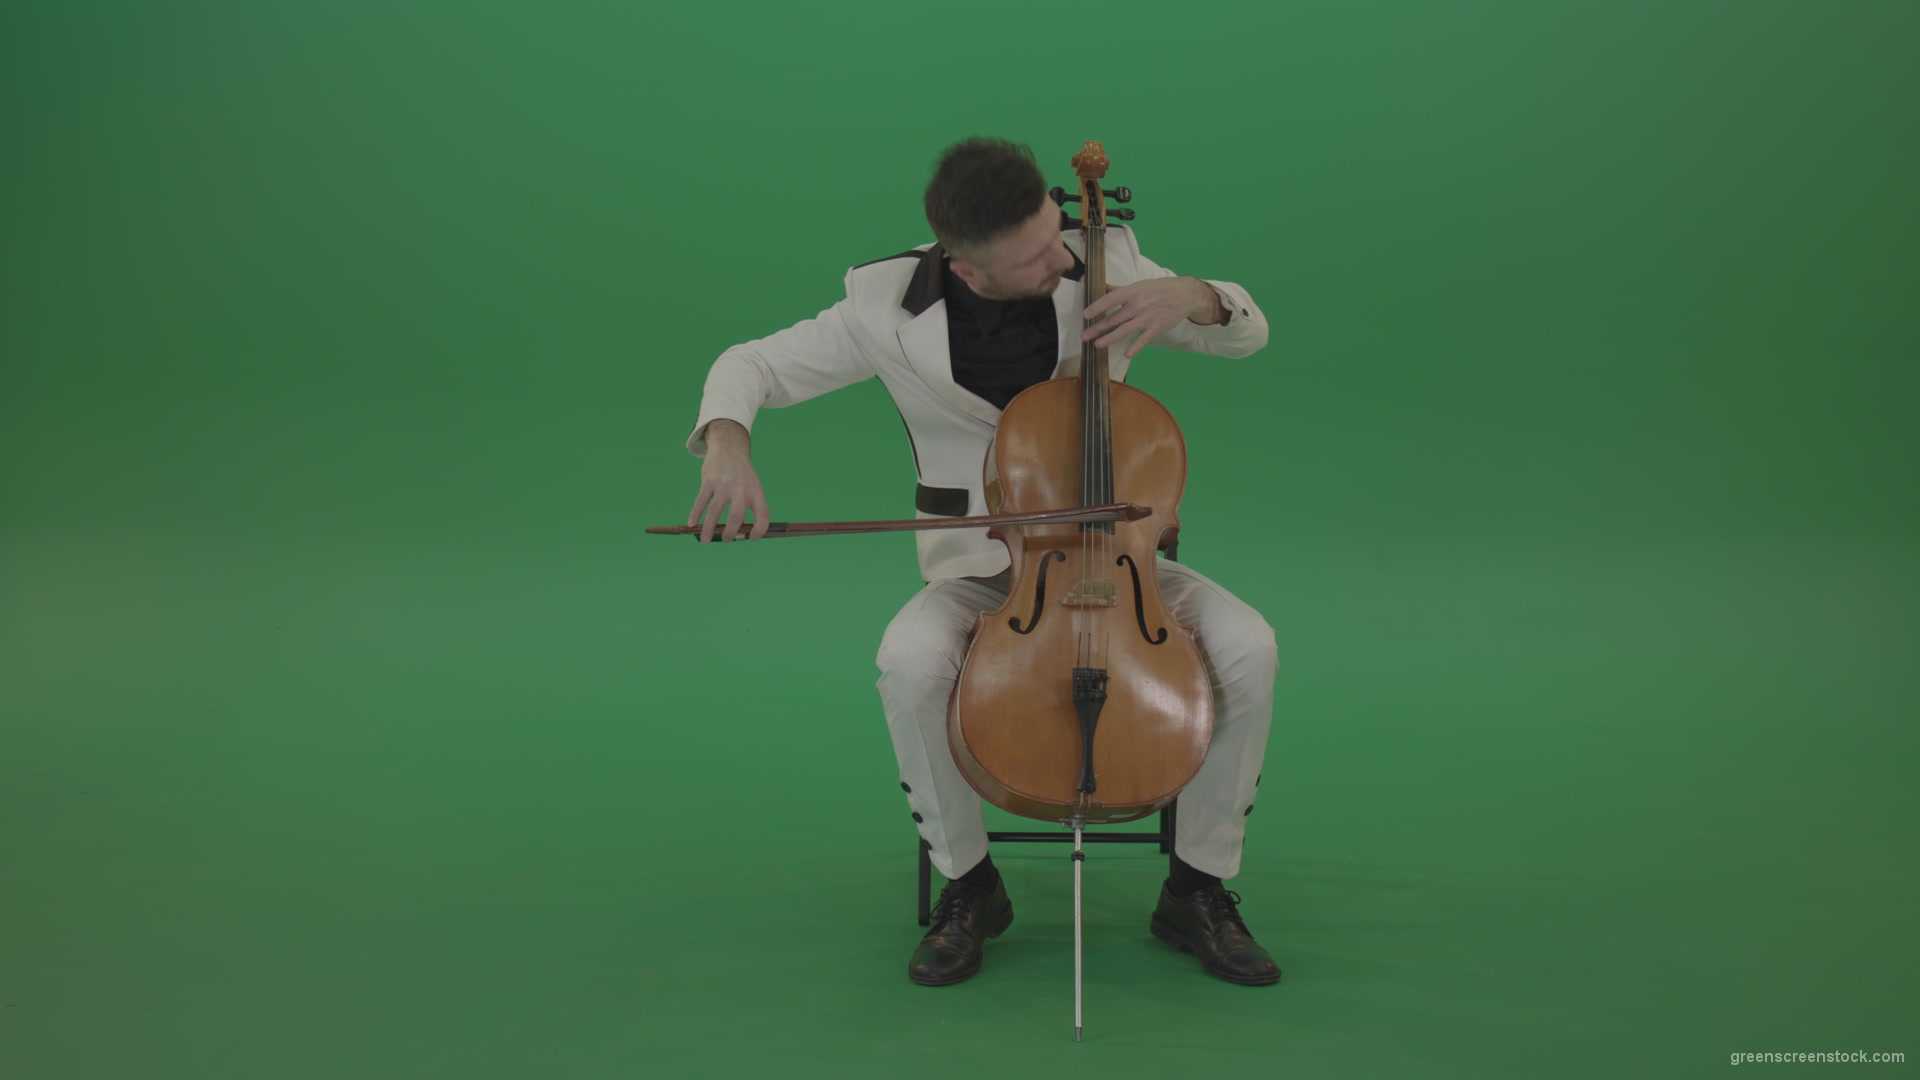 Classic-orchestra-man-in-white-wear-play-violoncello-cello-strings-music-instrument-isolated-on-green-screen_009 Green Screen Stock